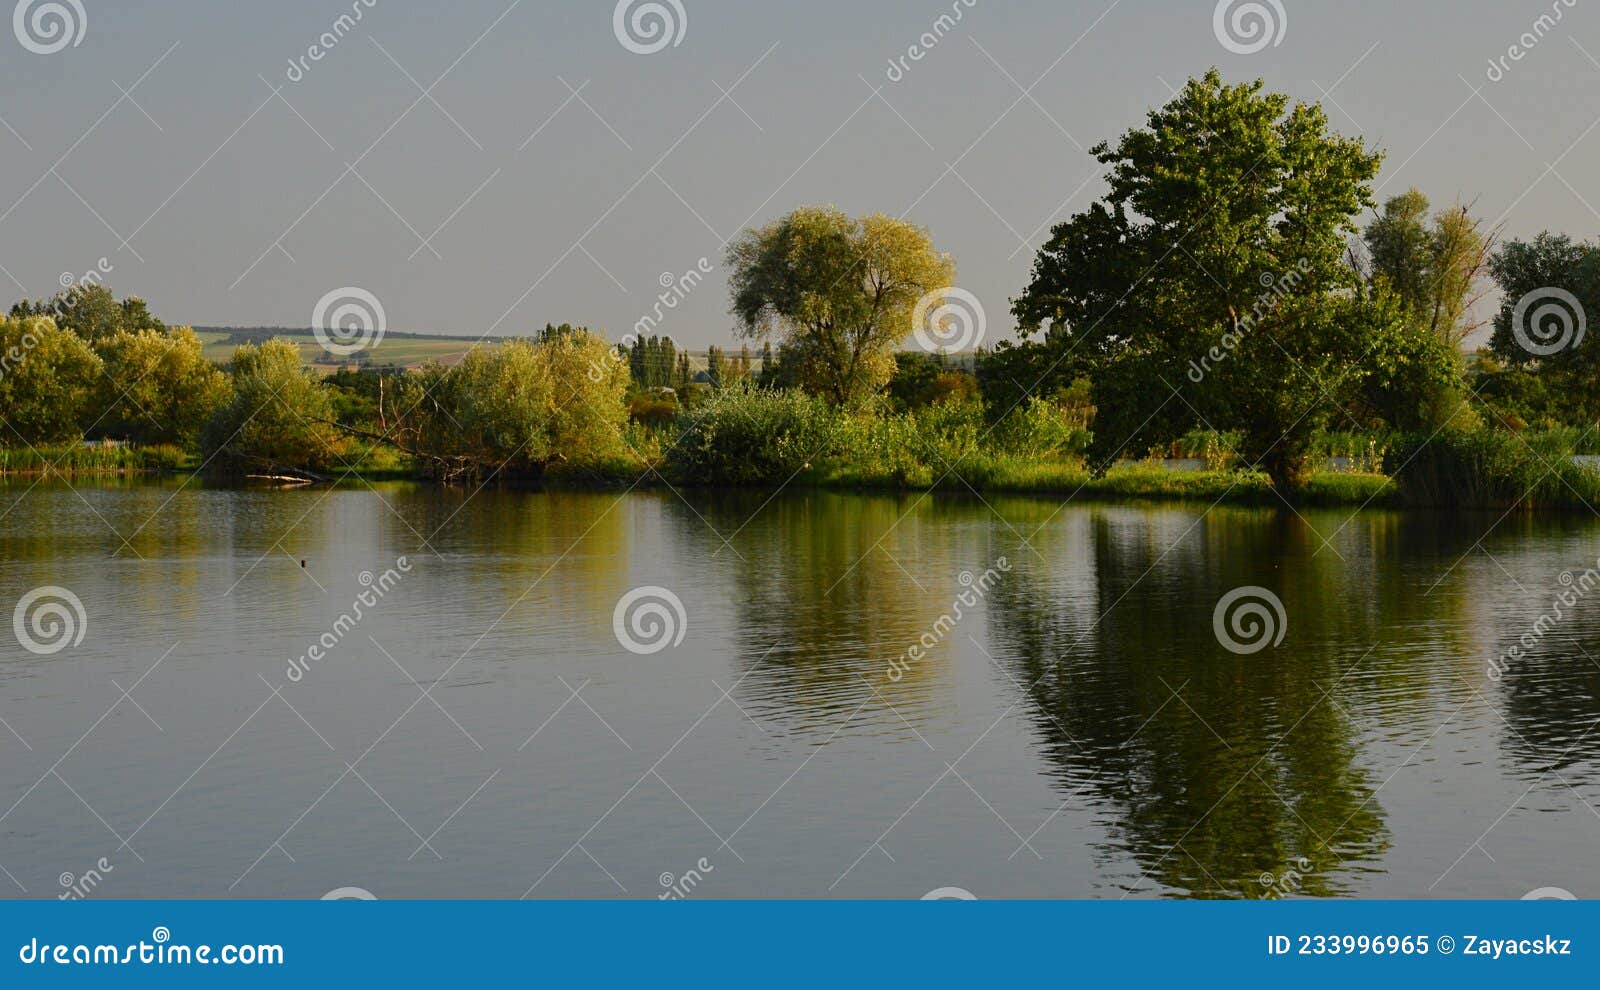 trees and varios wetland plants on bank of large fish pond, water surface with slight ripples, summer afternoon sunshine